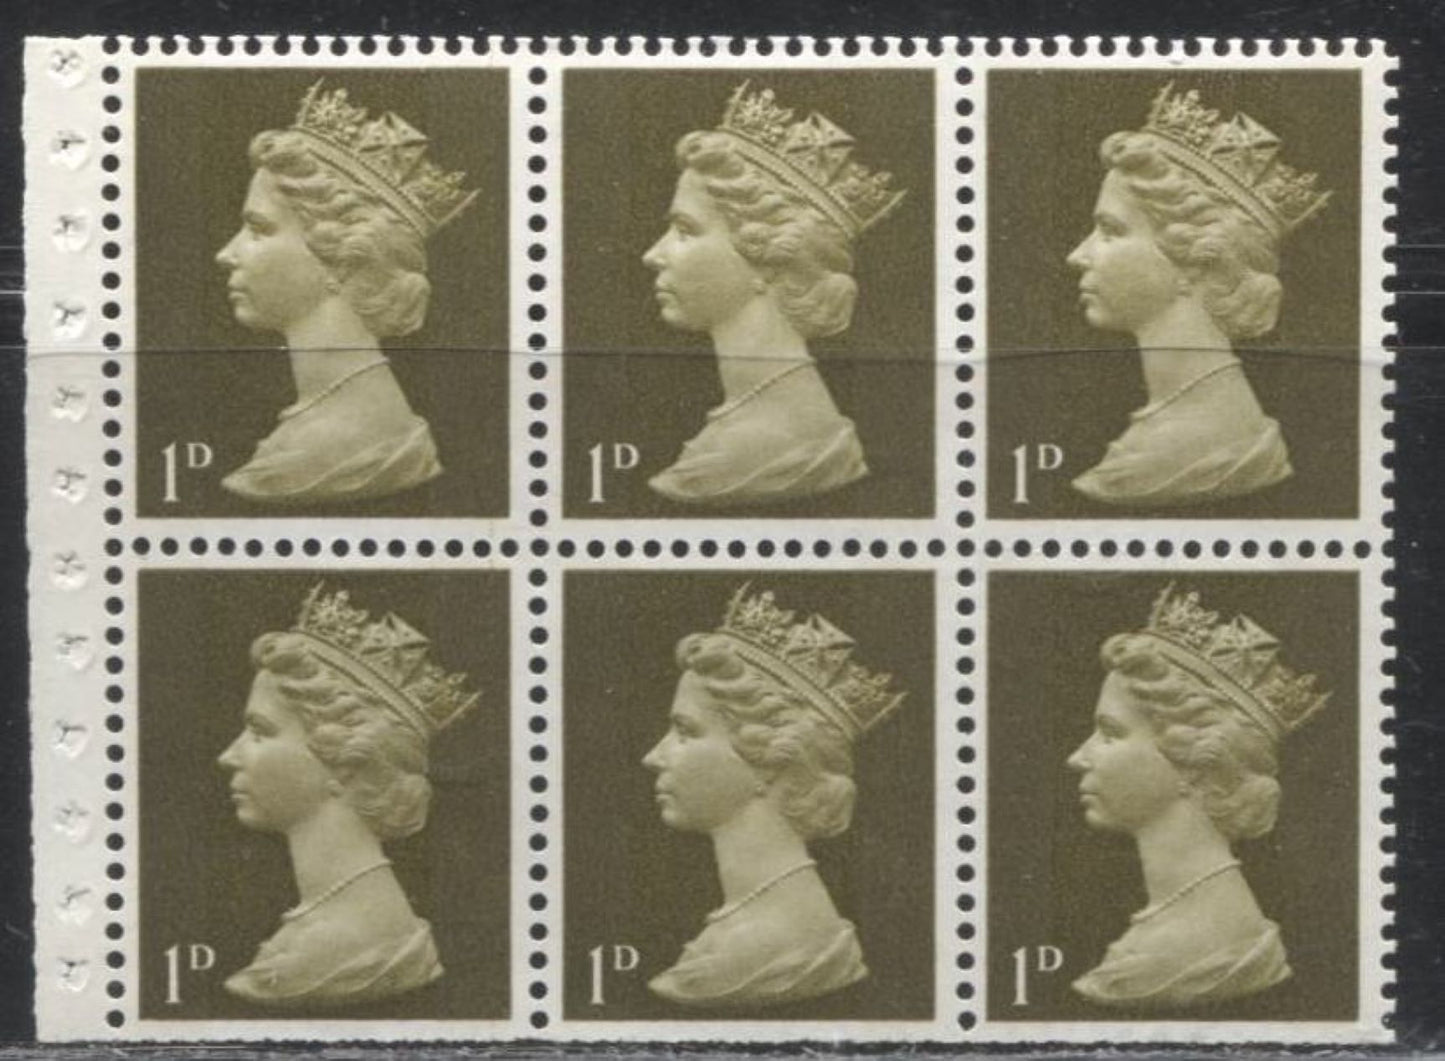 Great Britain SG#LP56 4/6d- Black on Grey Blue 1967-1971 Pre-Decimal Machin Heads Issue, A Complete Booklet From March 1970, Various Fluorescence Levels For Interleaving Pages, Low Fluorescent "Victory" Cover